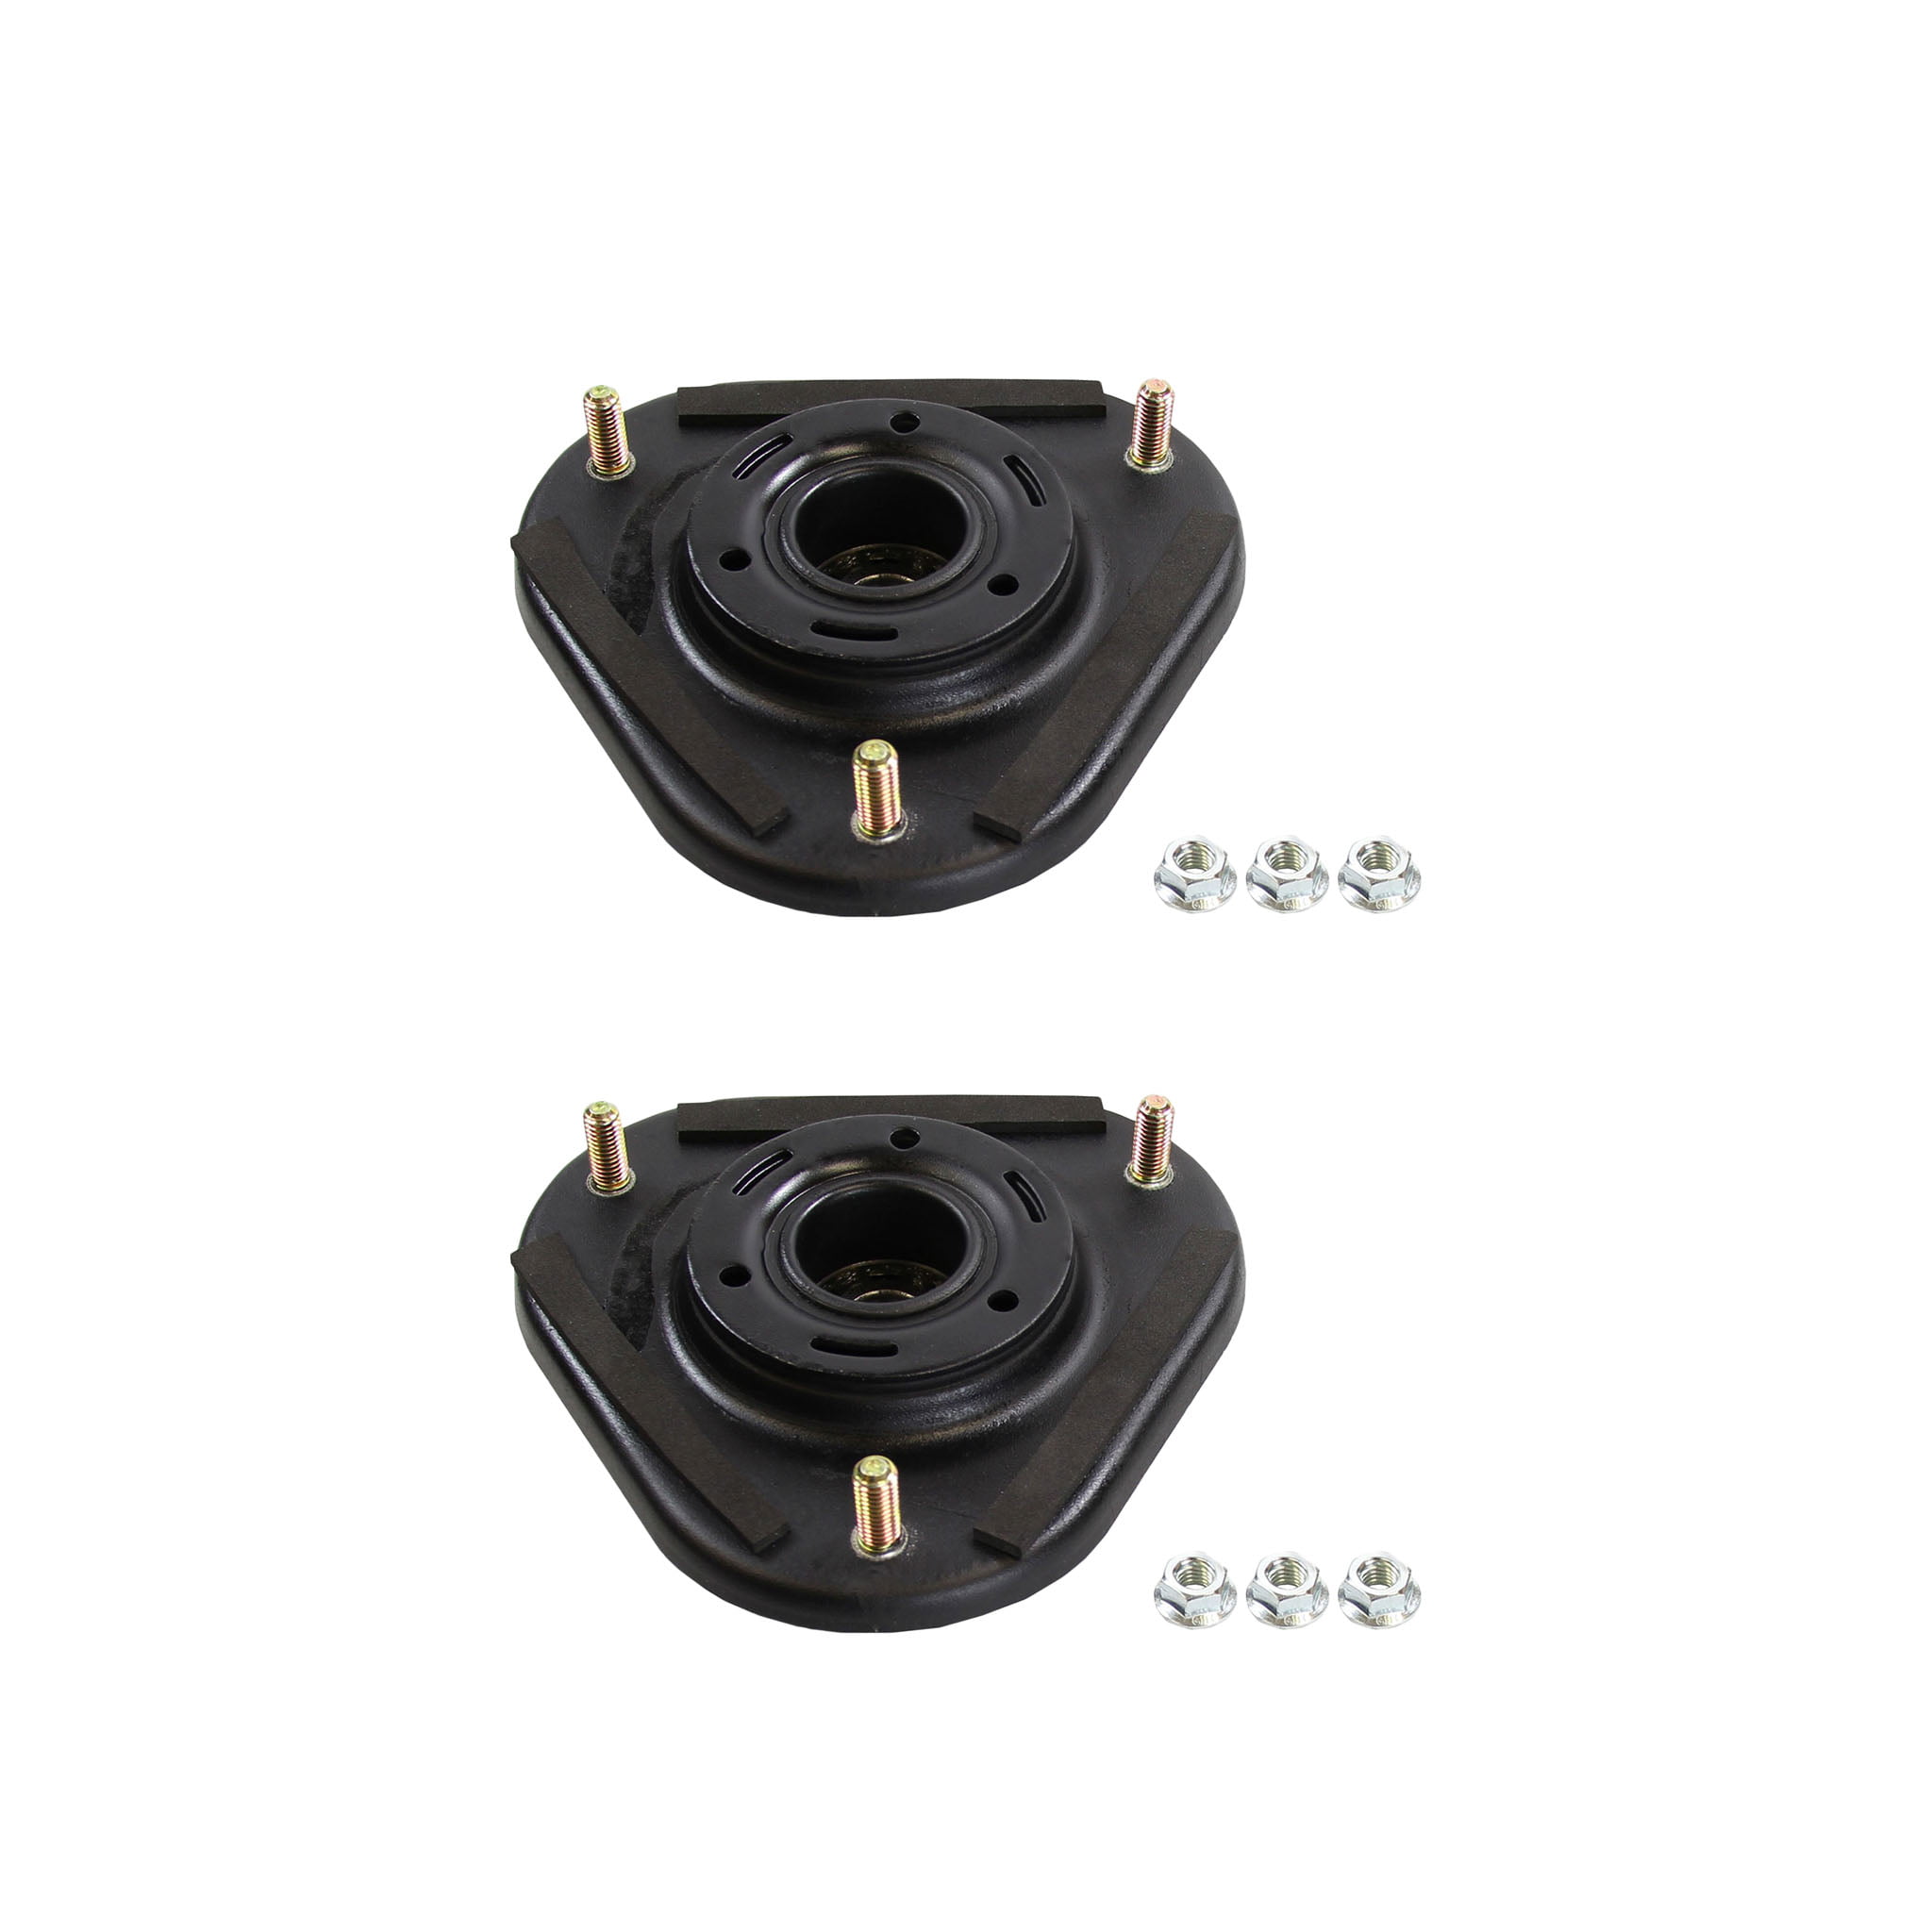 Pair Set of 2 Front Susp Strut Mount Kits Compatible with Toyota Corolla Prius